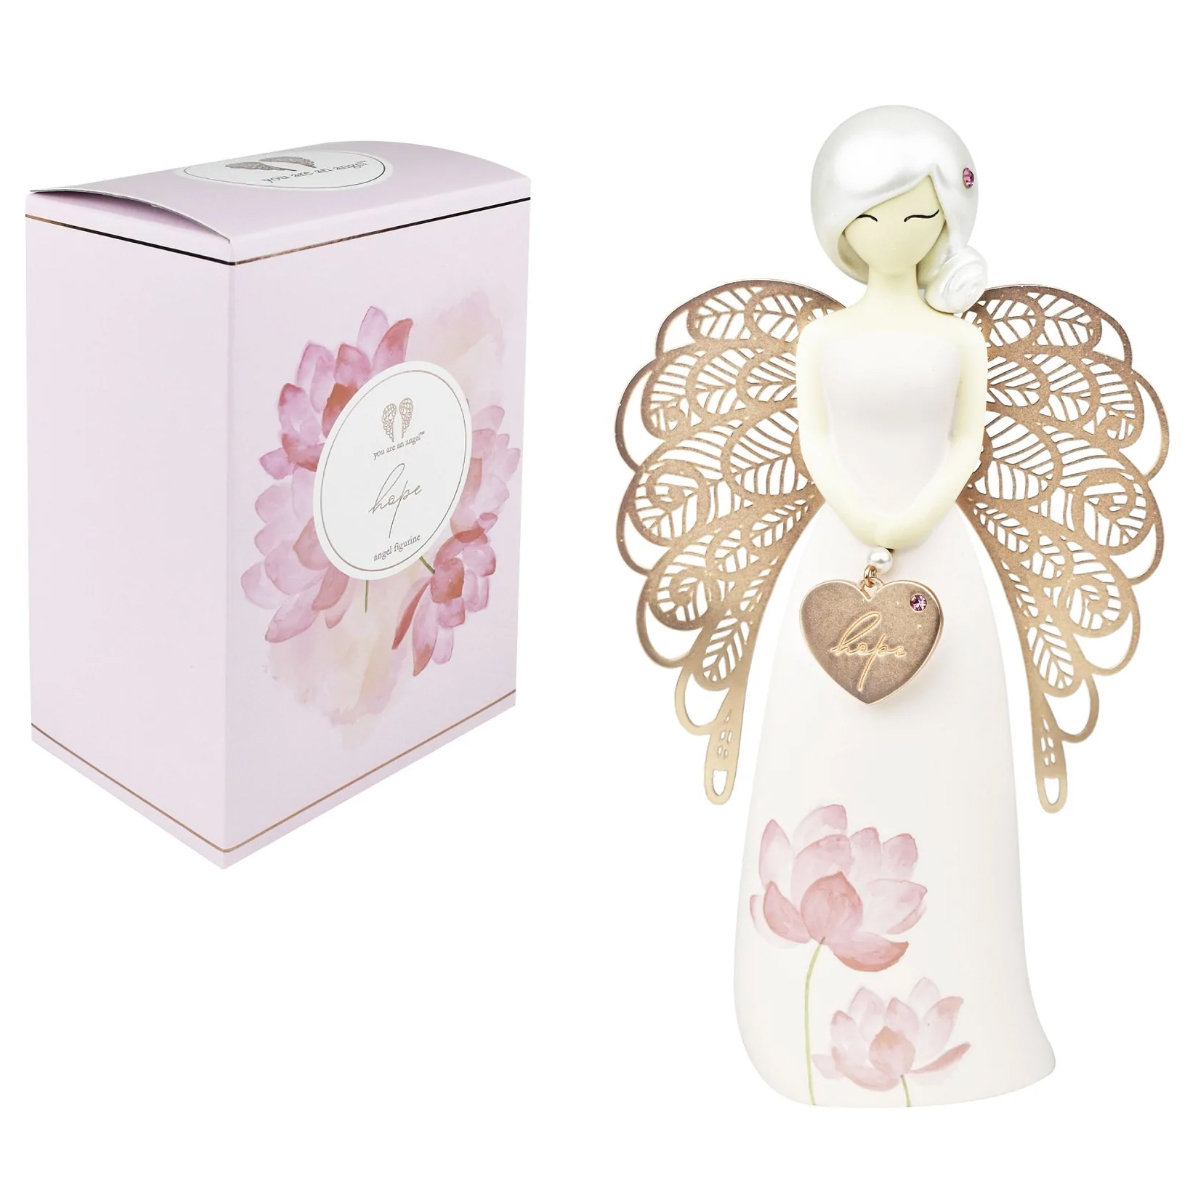 Statuette You Are An Angel - Hope